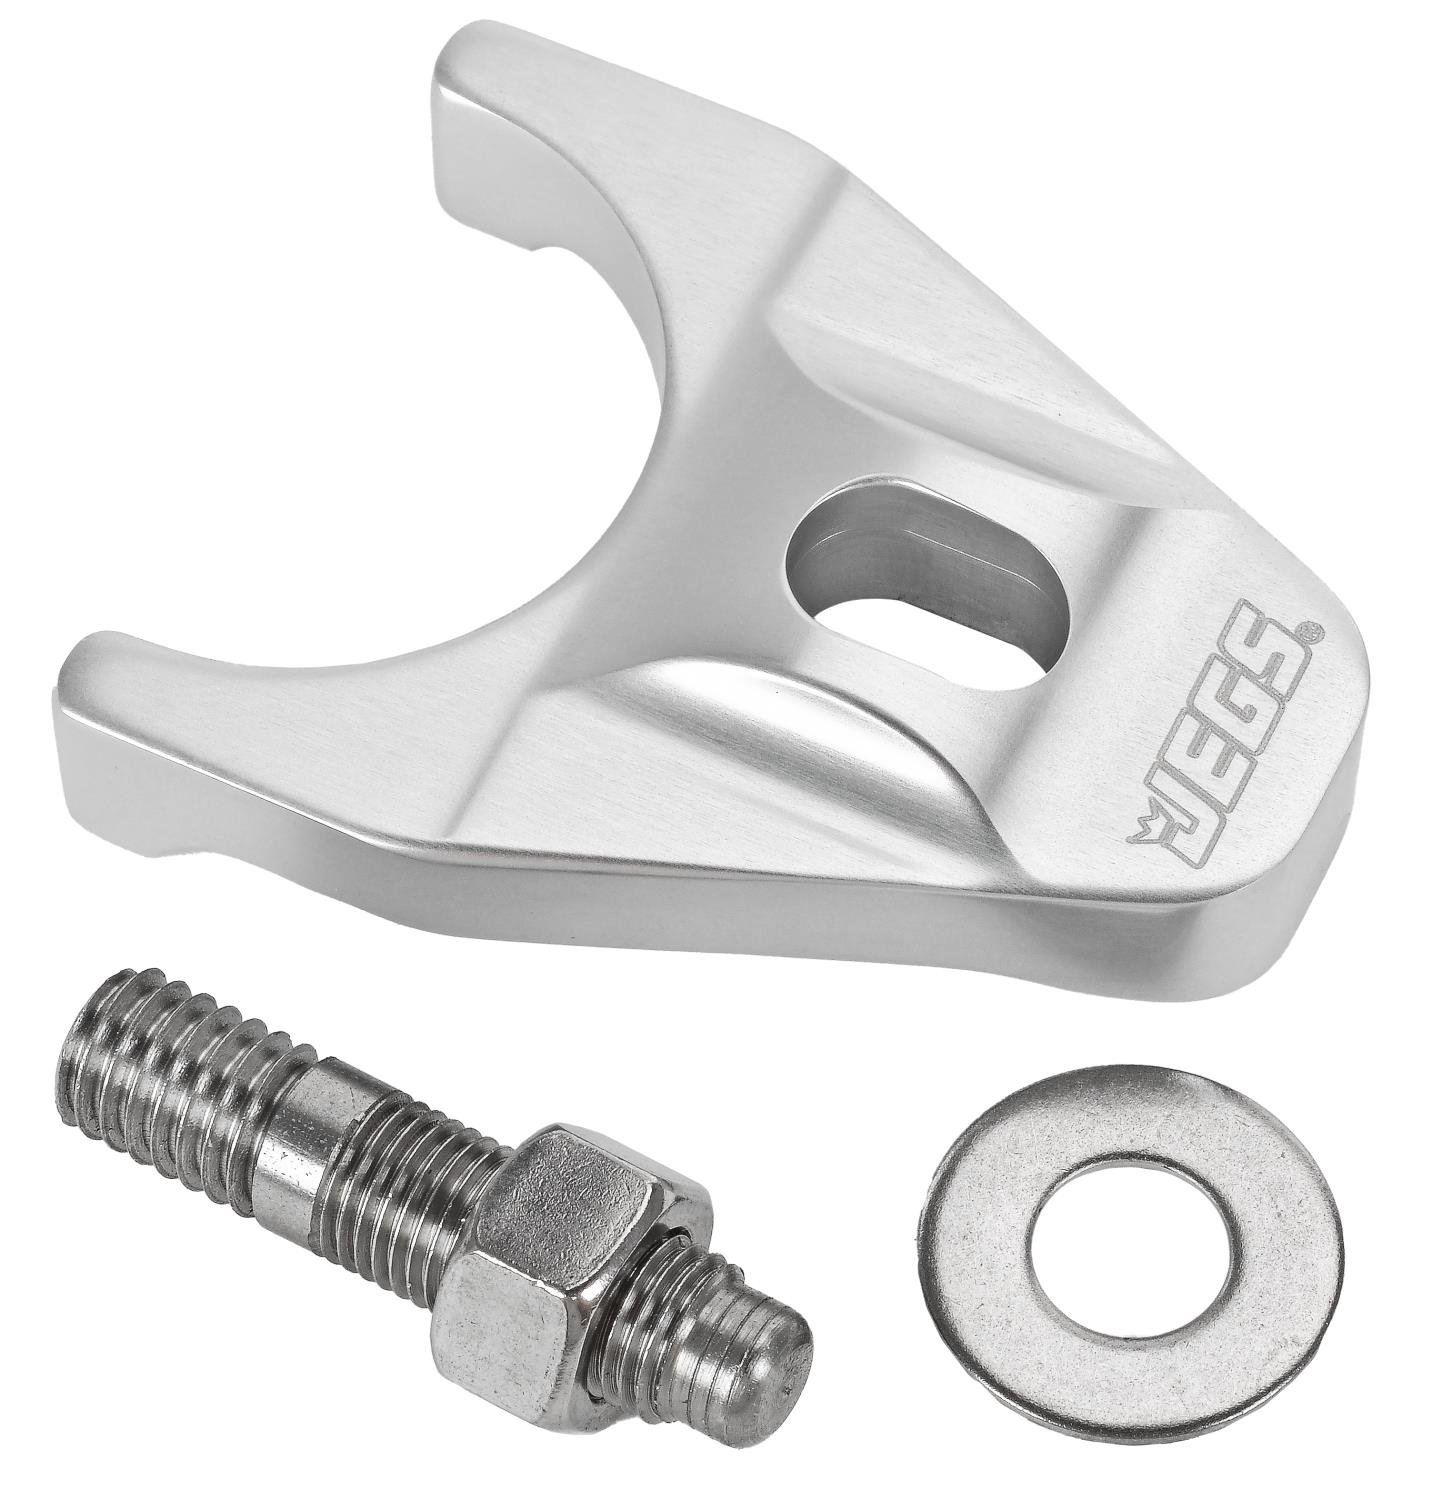 Billet Distributor Hold-Down Clamp Chevy: 90° V6, Small Block, and Big Block [Clear Anodized]